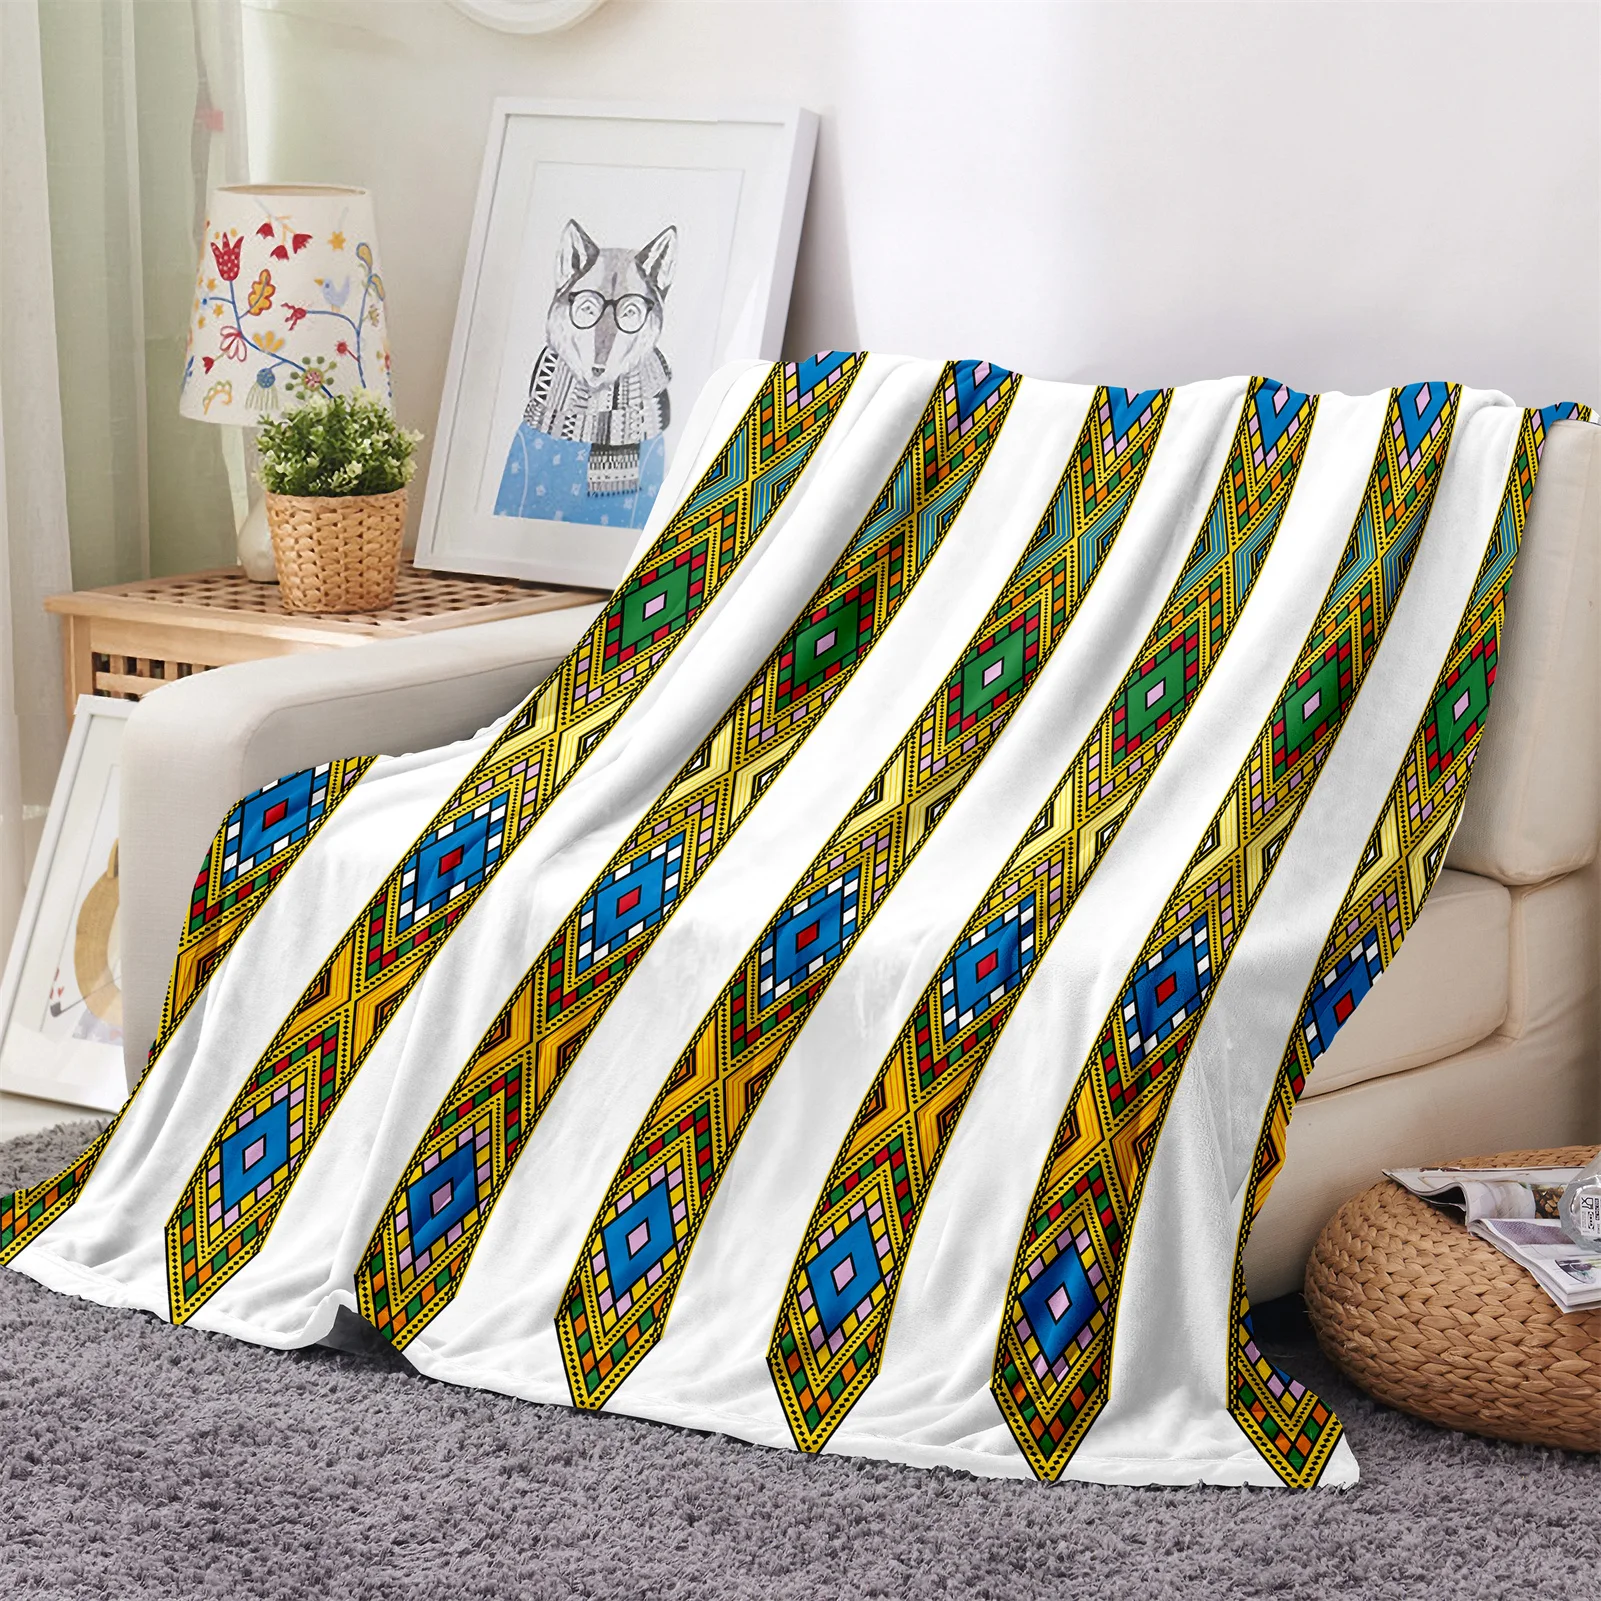 

White Africa Ethiopian Empire Abyssinia Soft Warm Polyester Throw Flannel Blanket for Couch Bed Travel Cover Bedspread Bedding